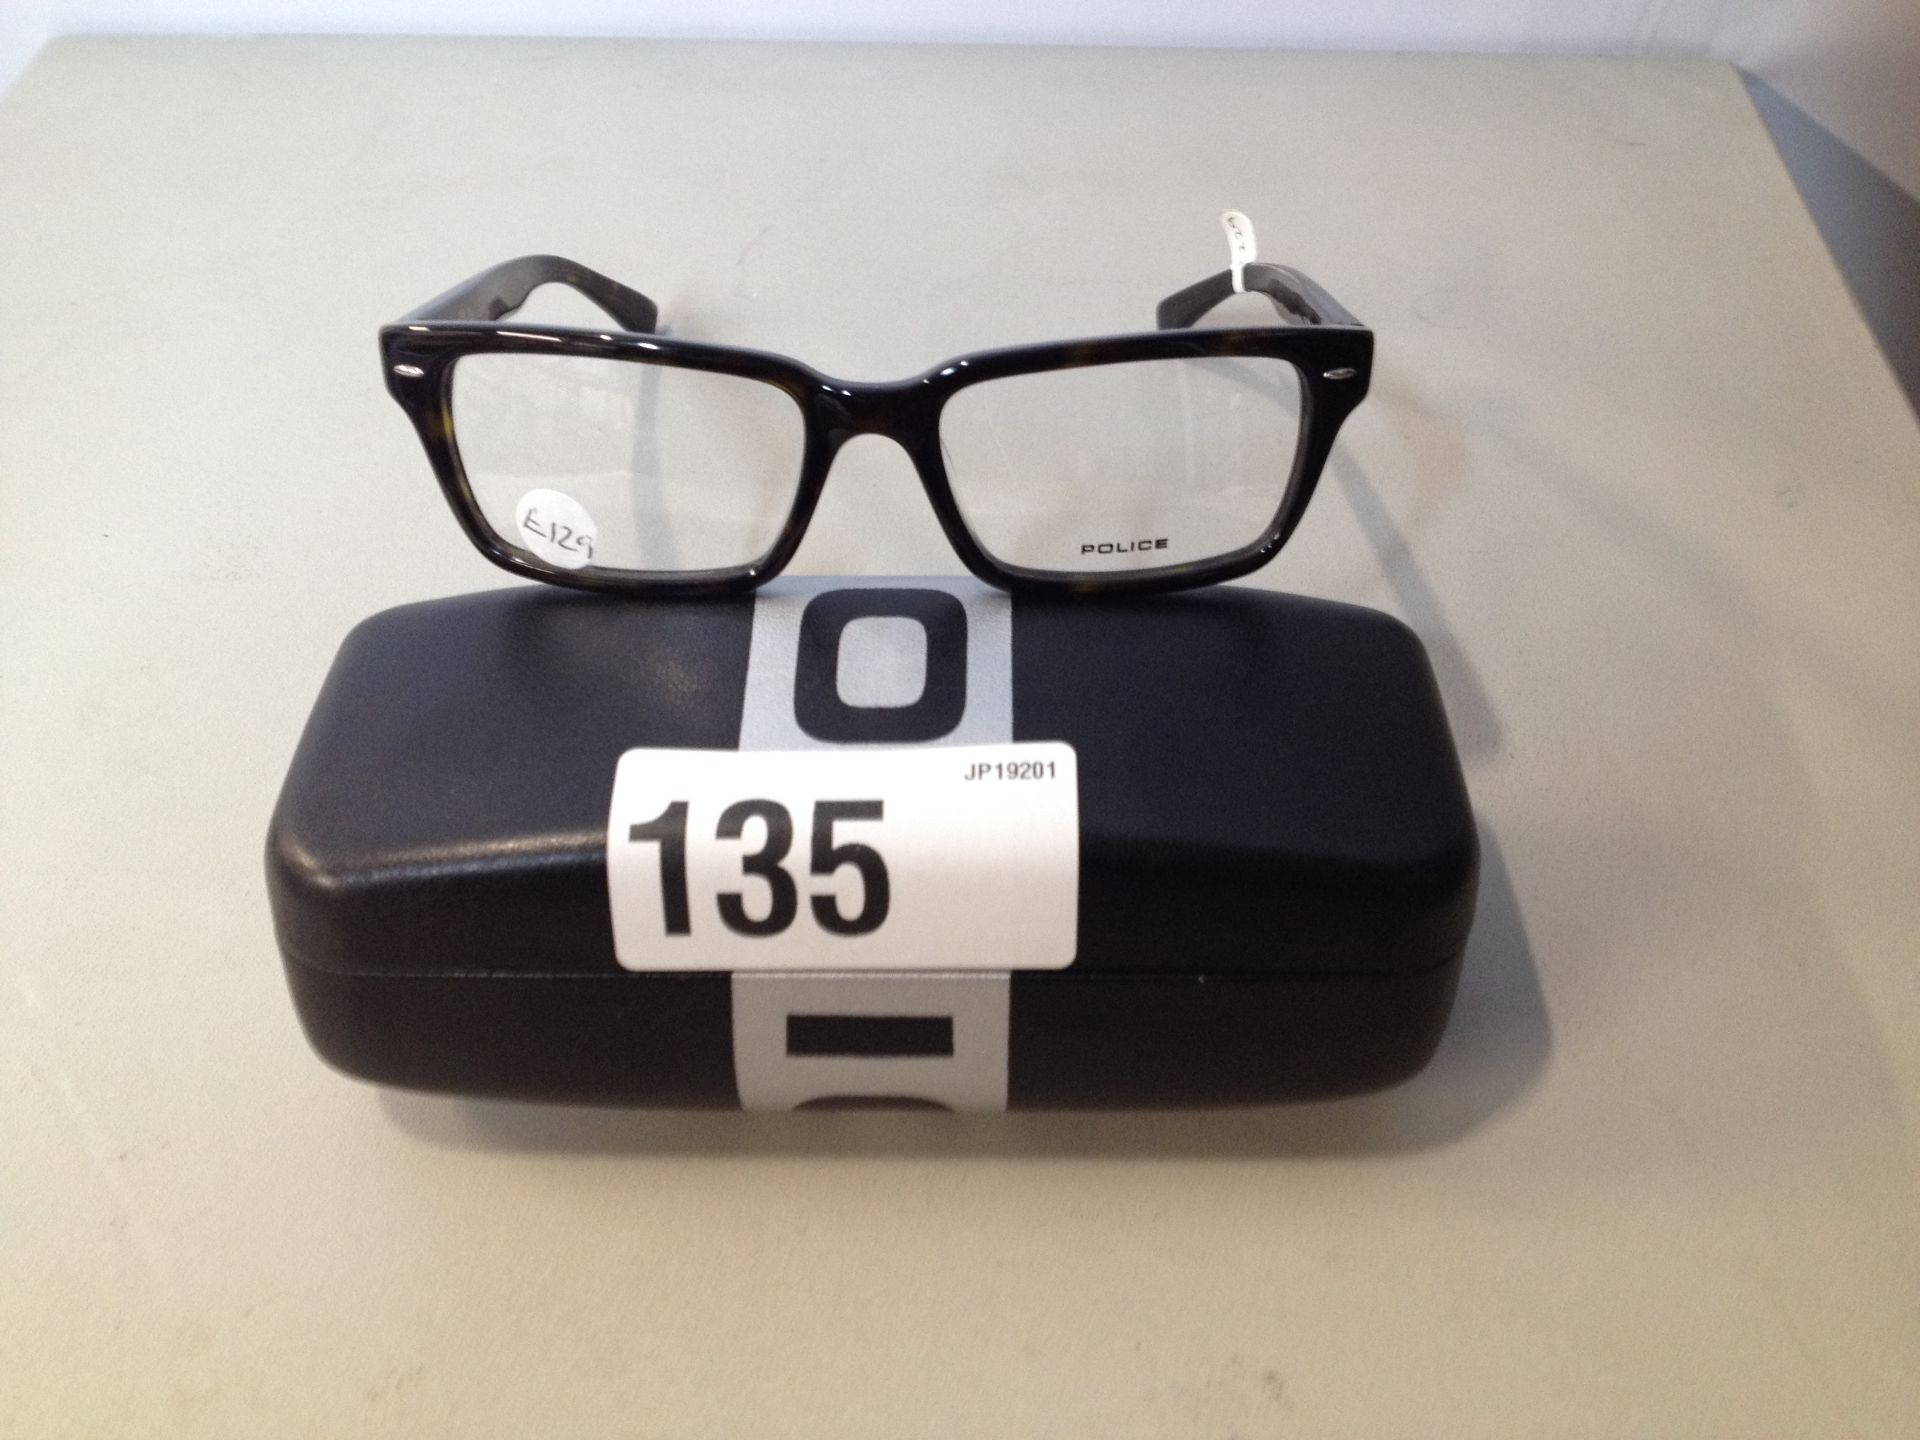 1 x Pair of POLICE glasses